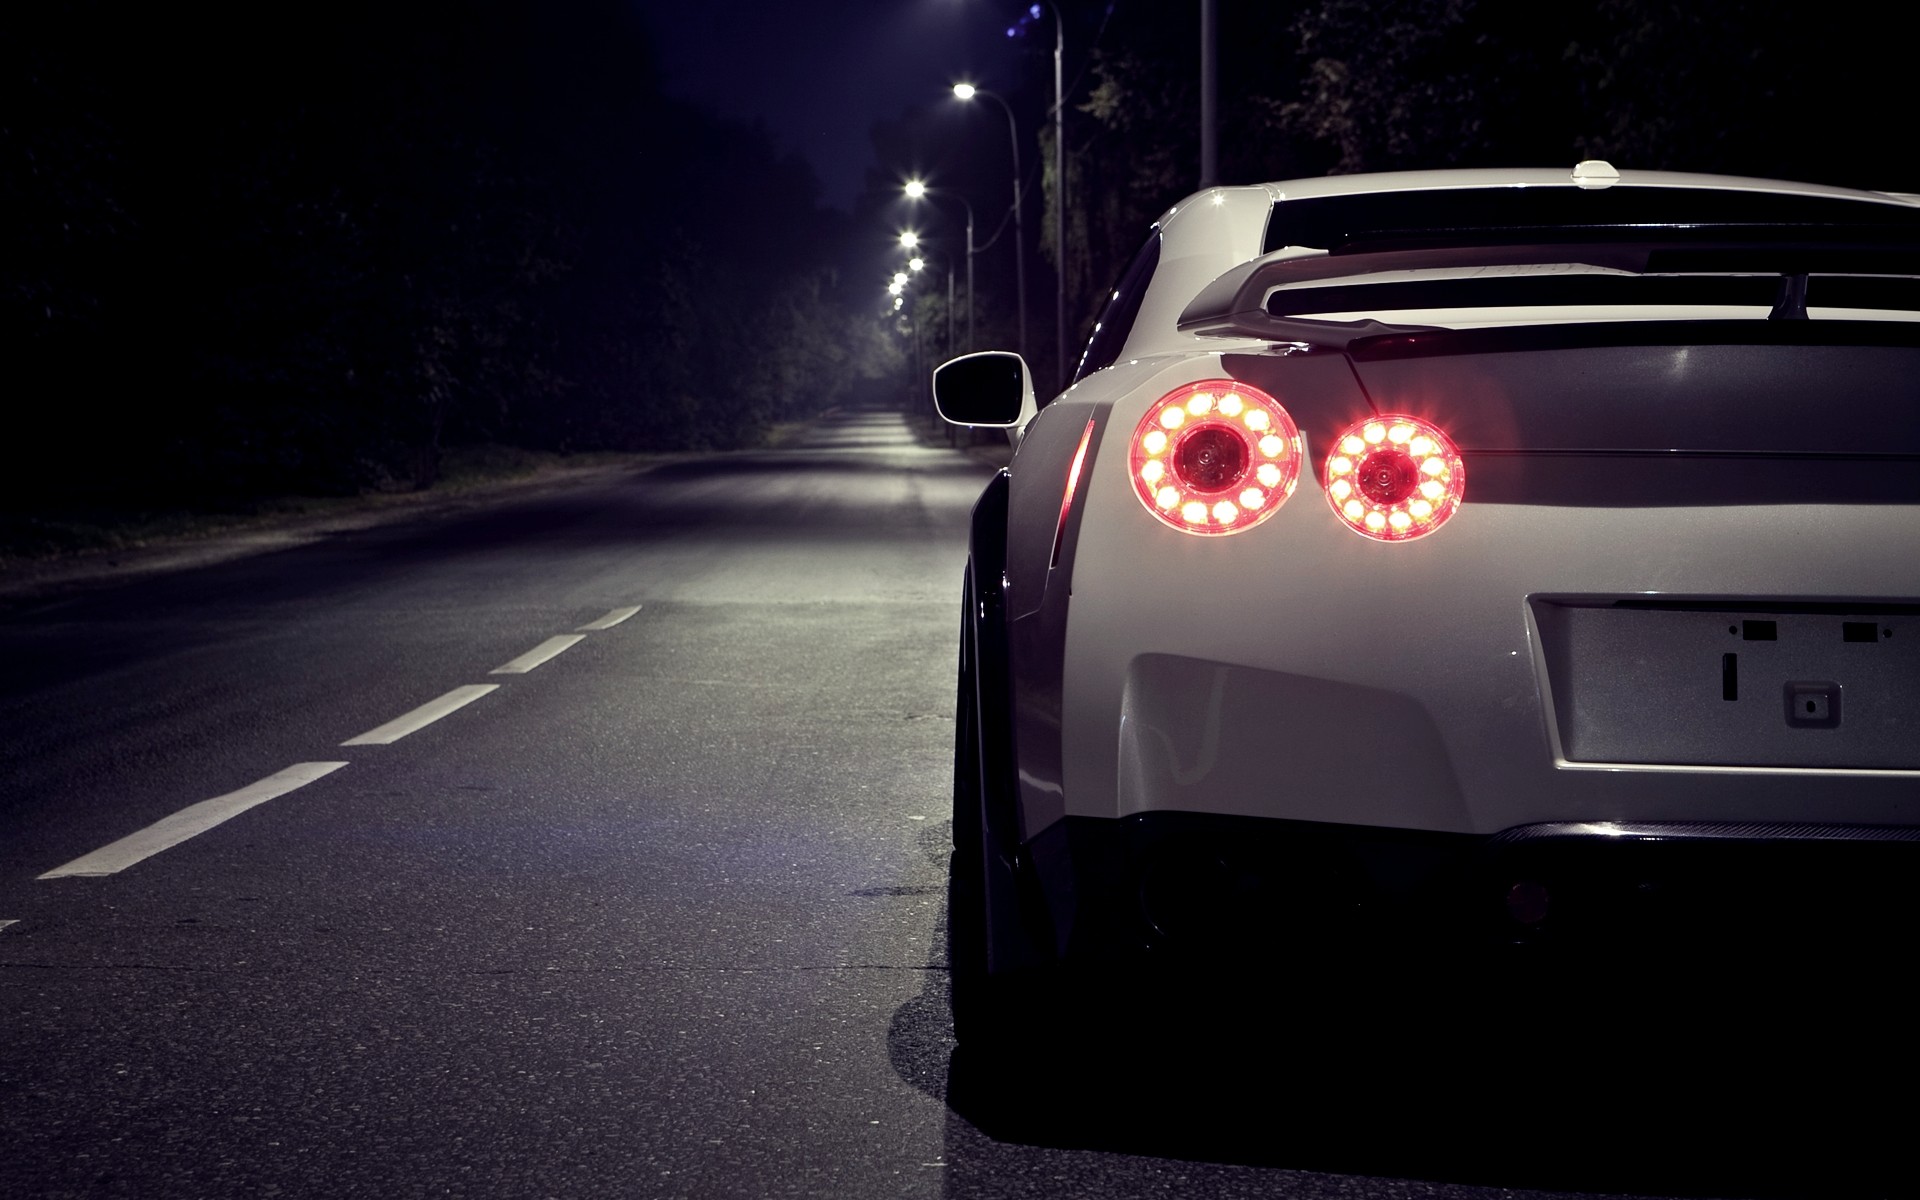 White Nissan 35 GTR at Night Rear Section wallpaper. White Nissan 35 GTR at Night Rear Section